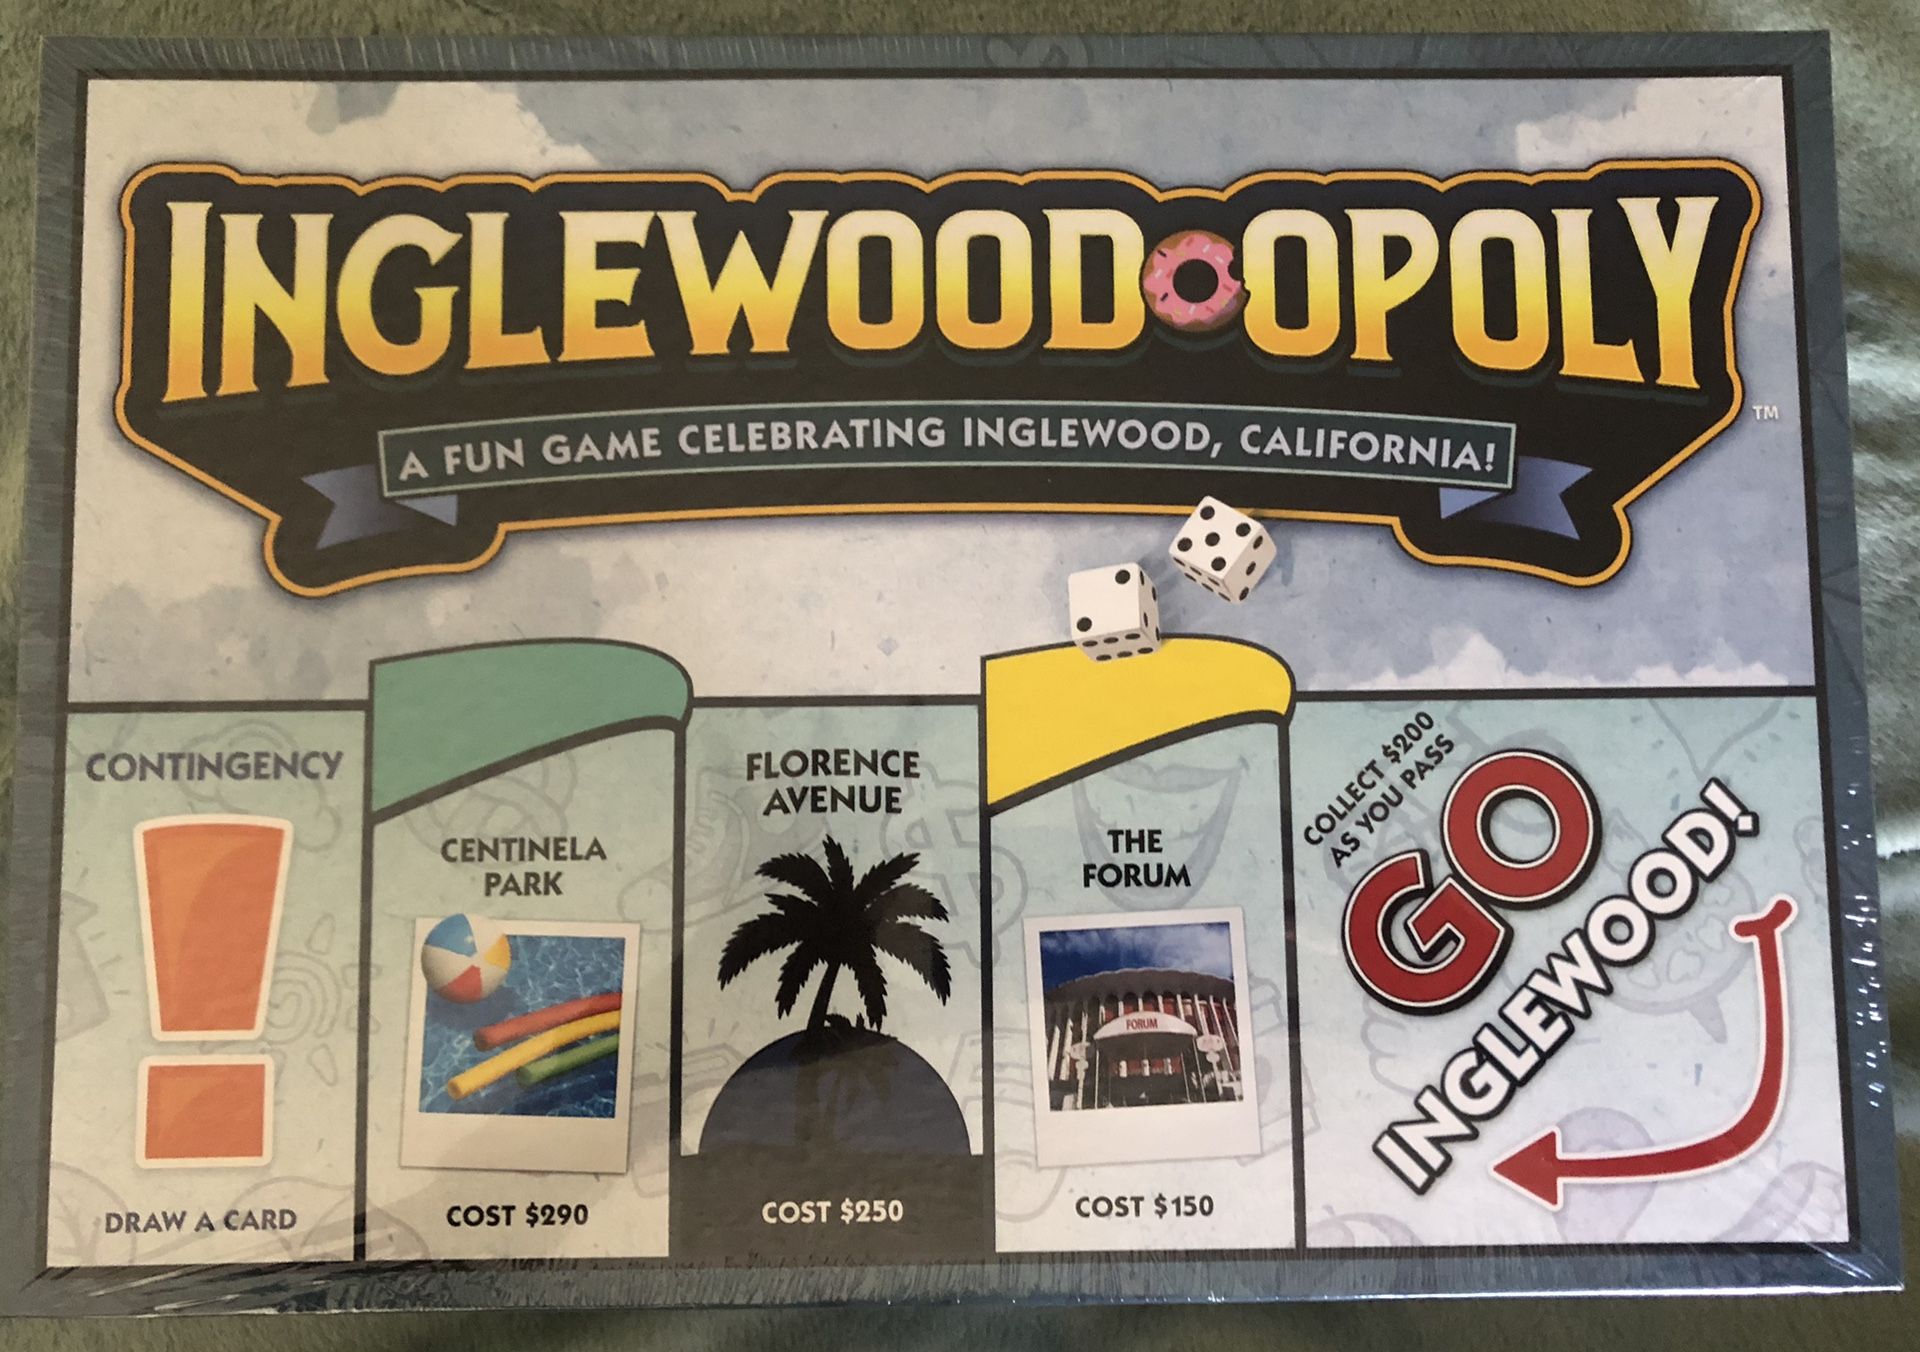 Inglewood-opoly Monopoly style game